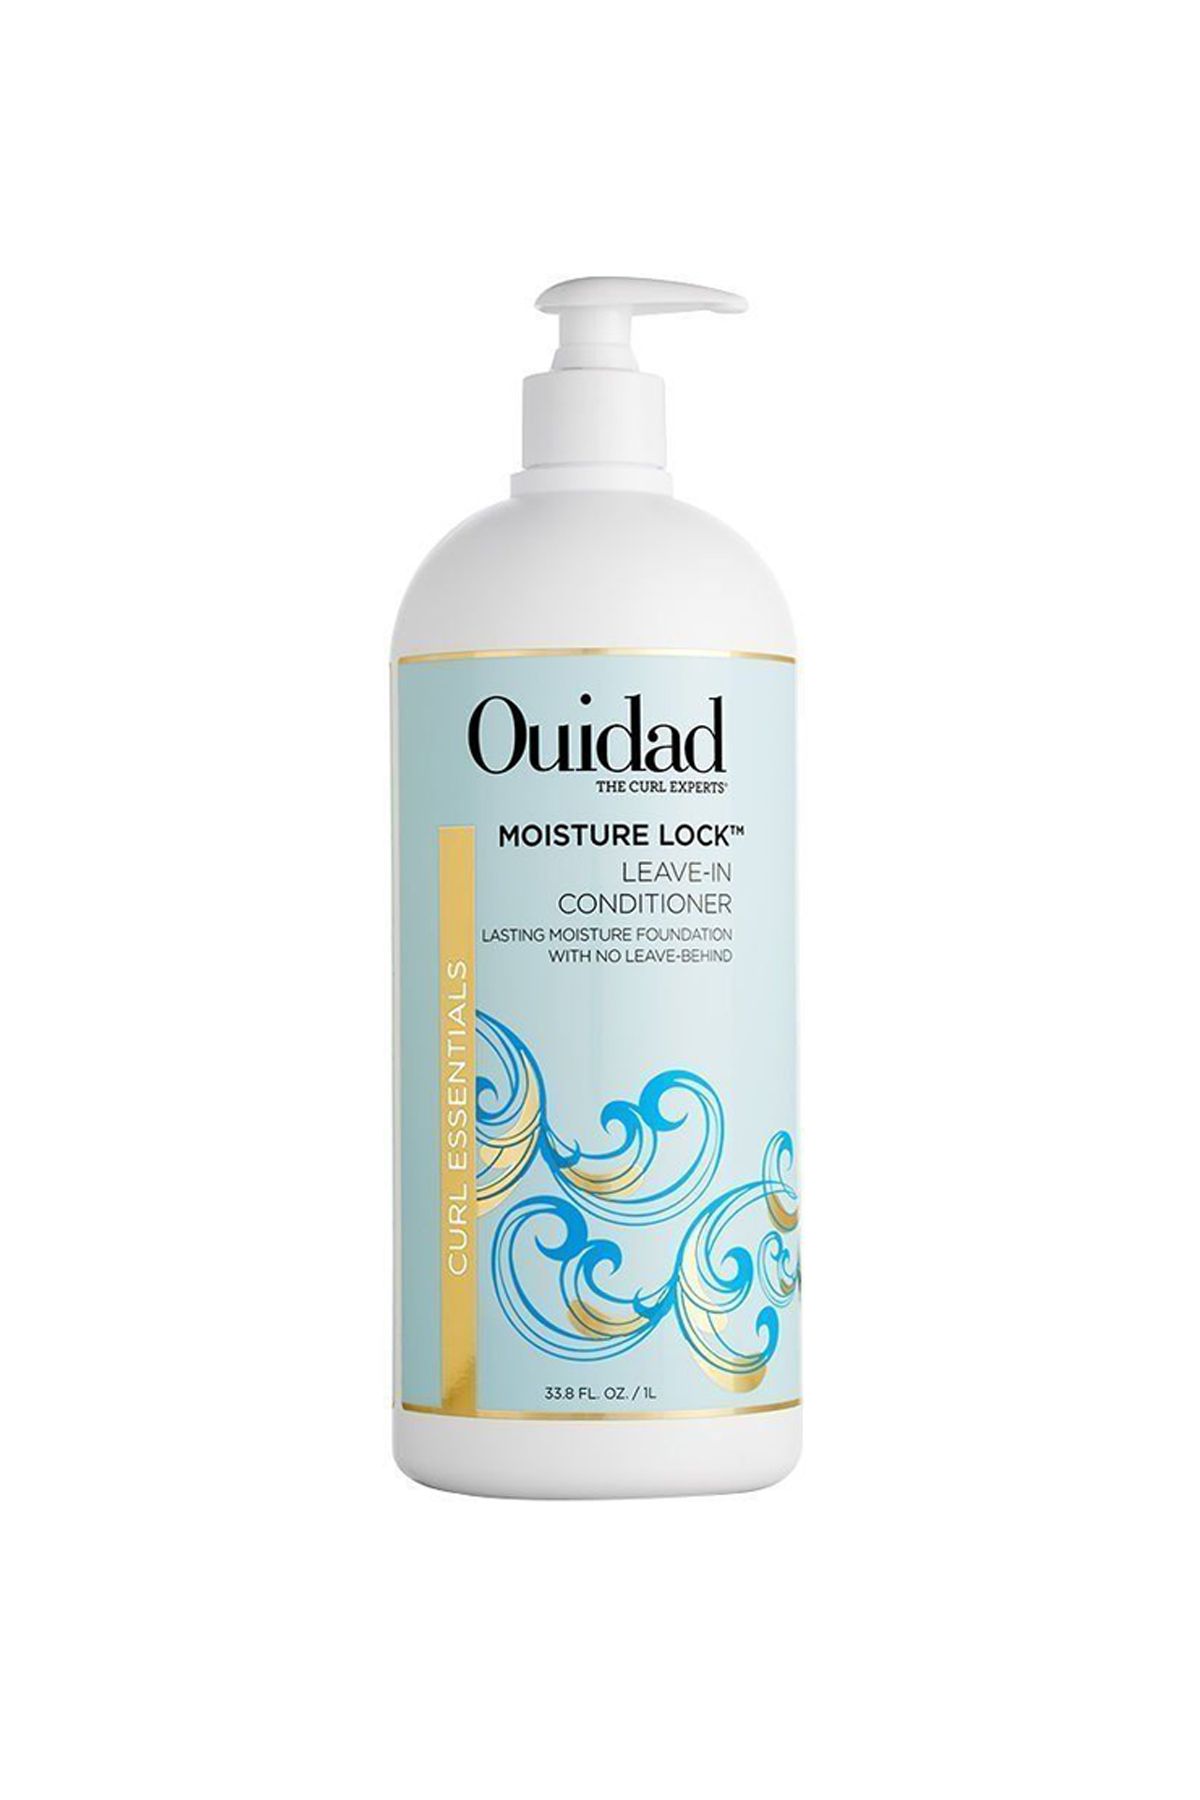 OUIDAD - MOISTURE LOCK LEAVE-IN CONDITIONER (1 LTR)